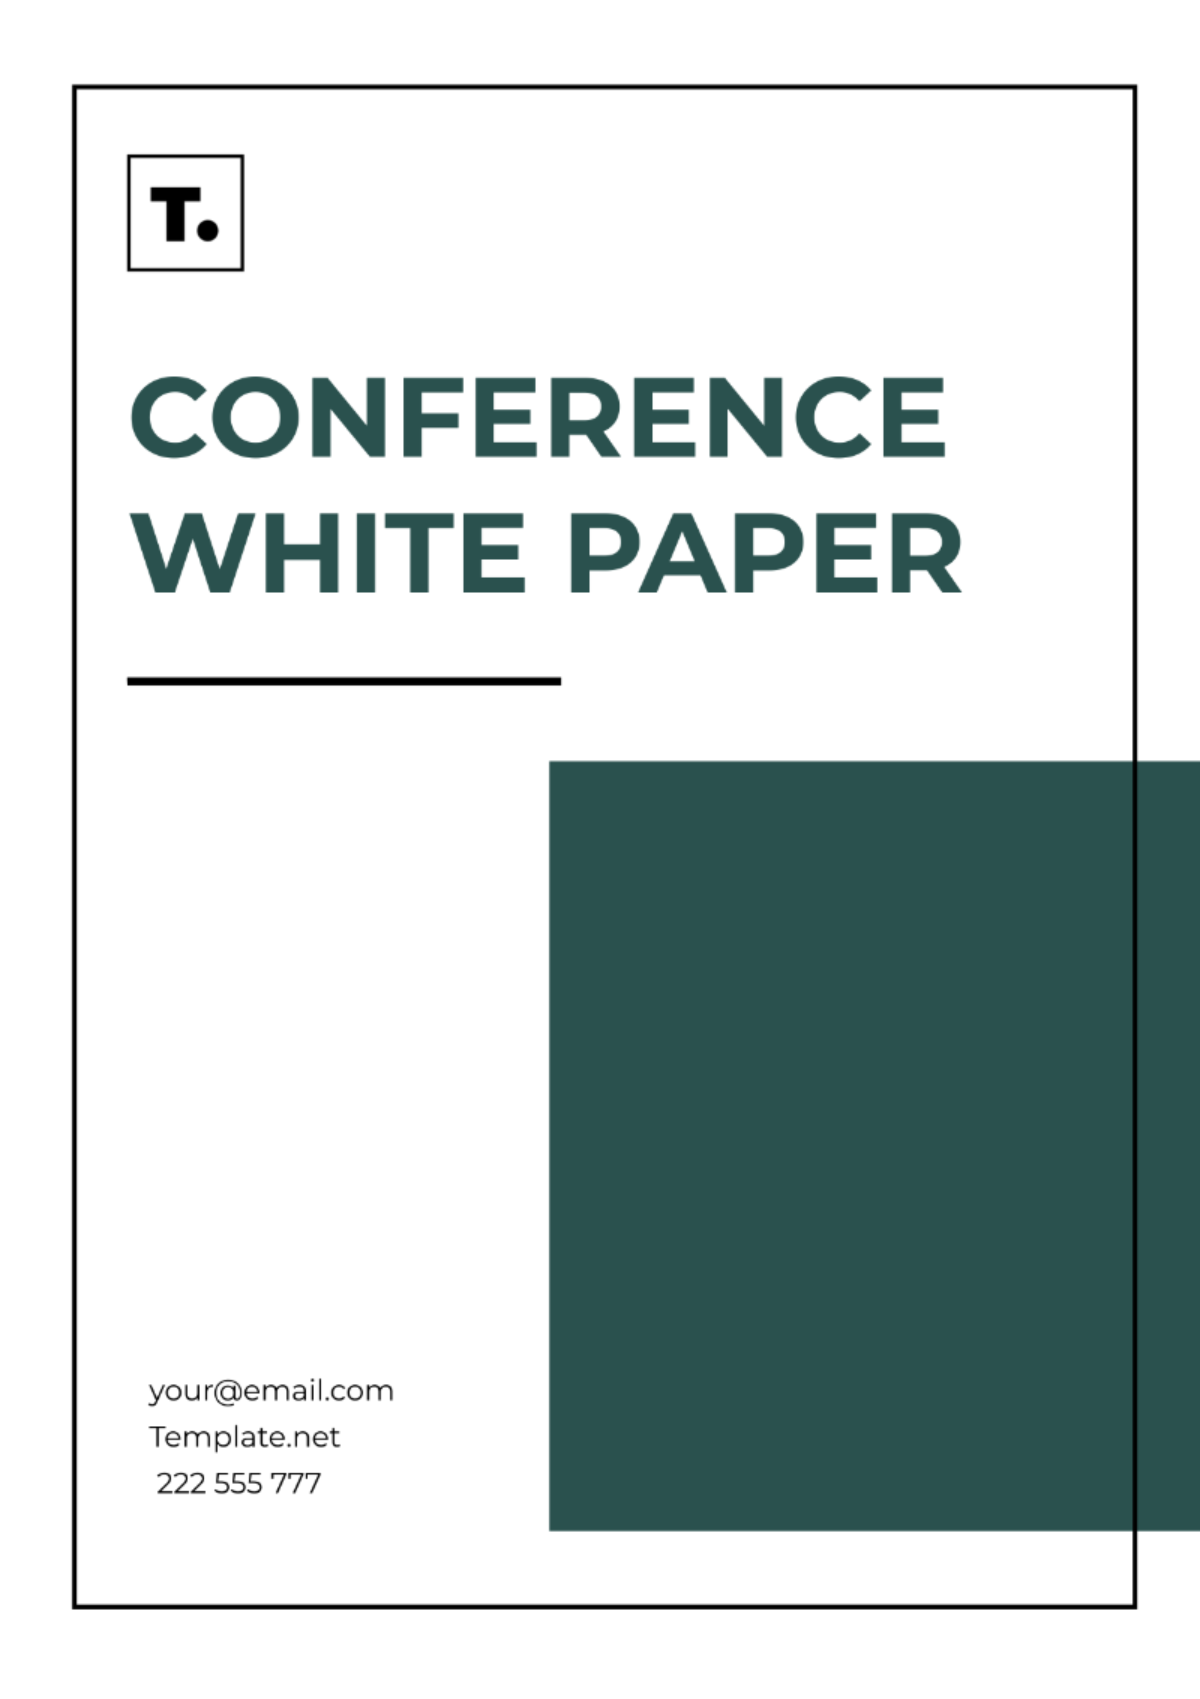 Free Conference White Paper Template